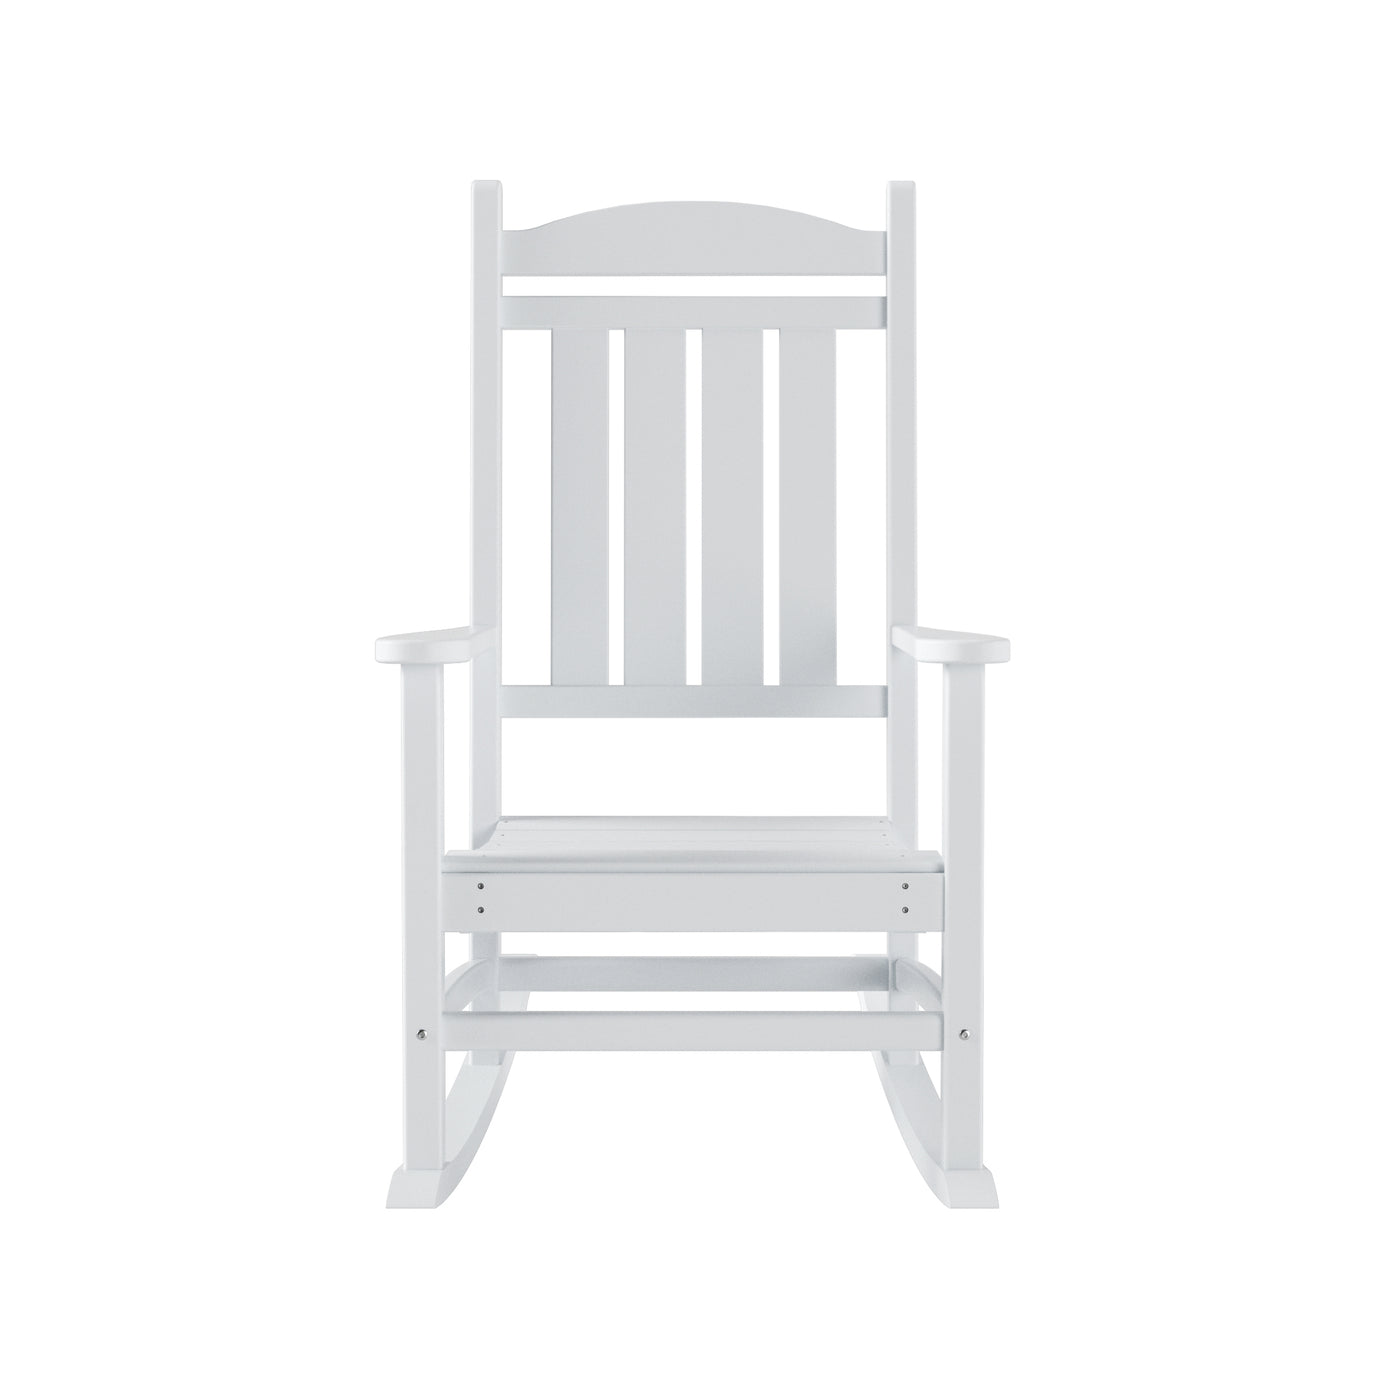 Malibu Outdoor Patio Porch Rocking Chair with Side Table Set